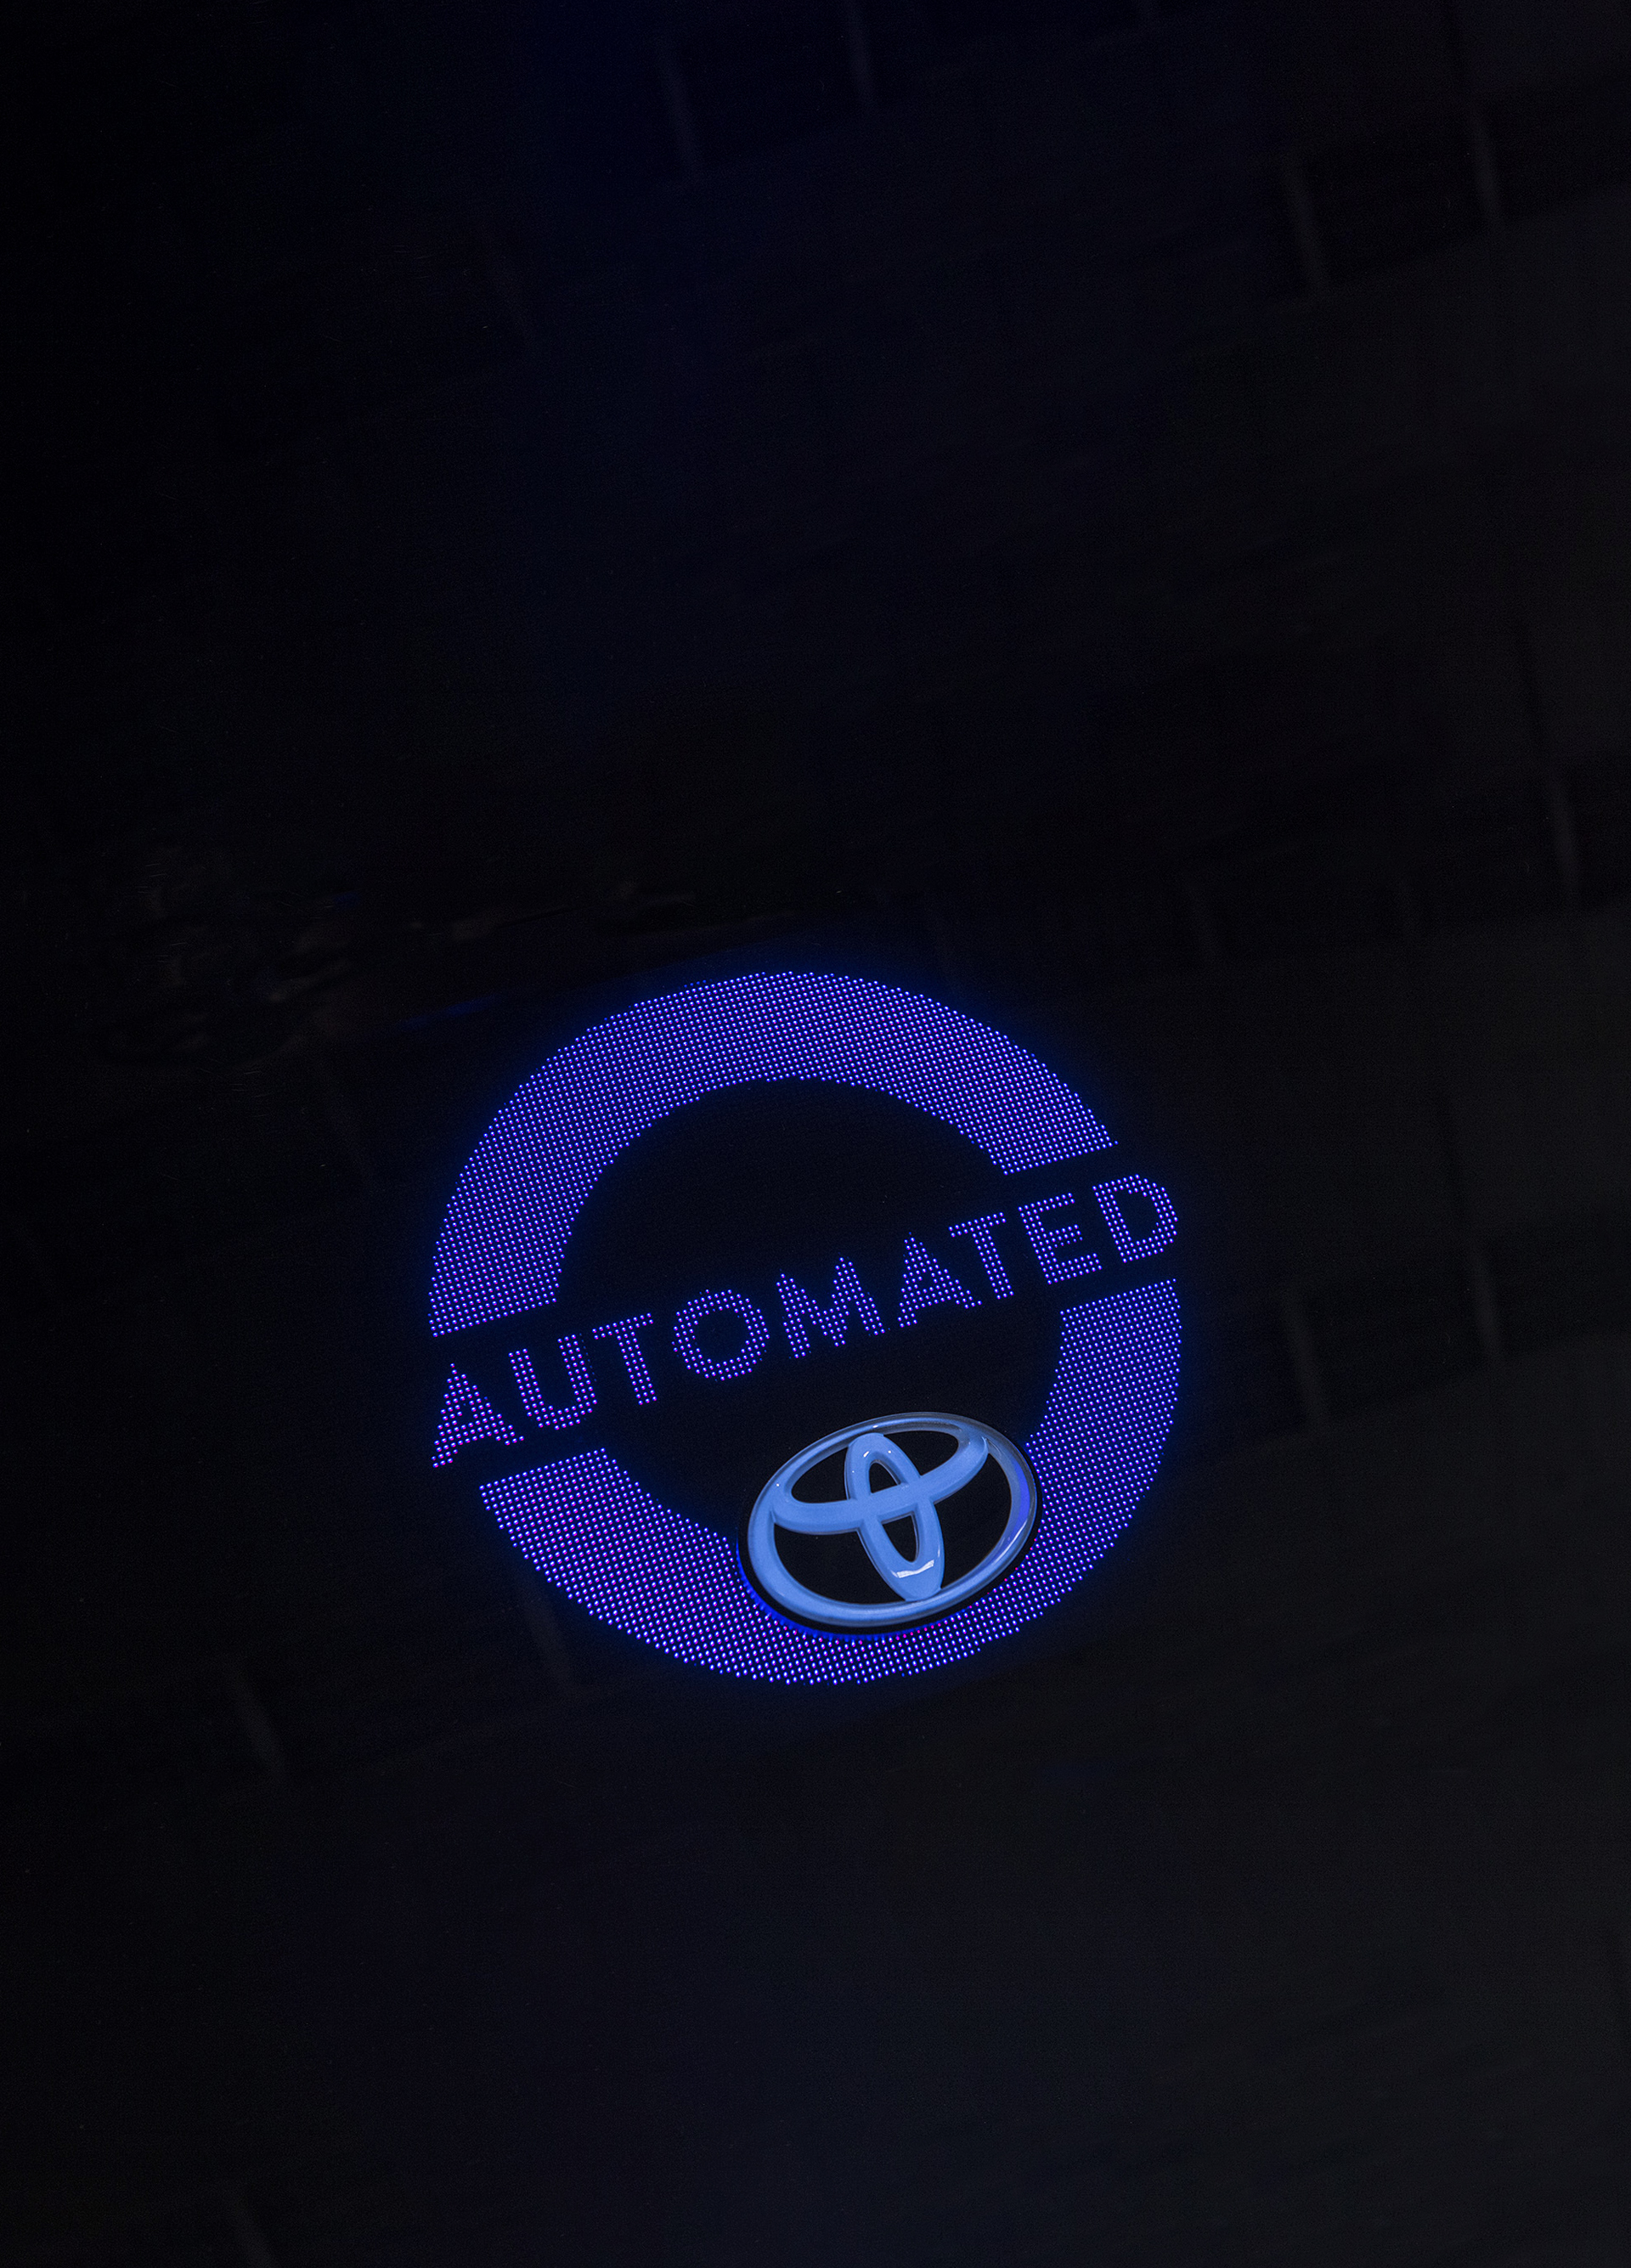 Toyota automated project image